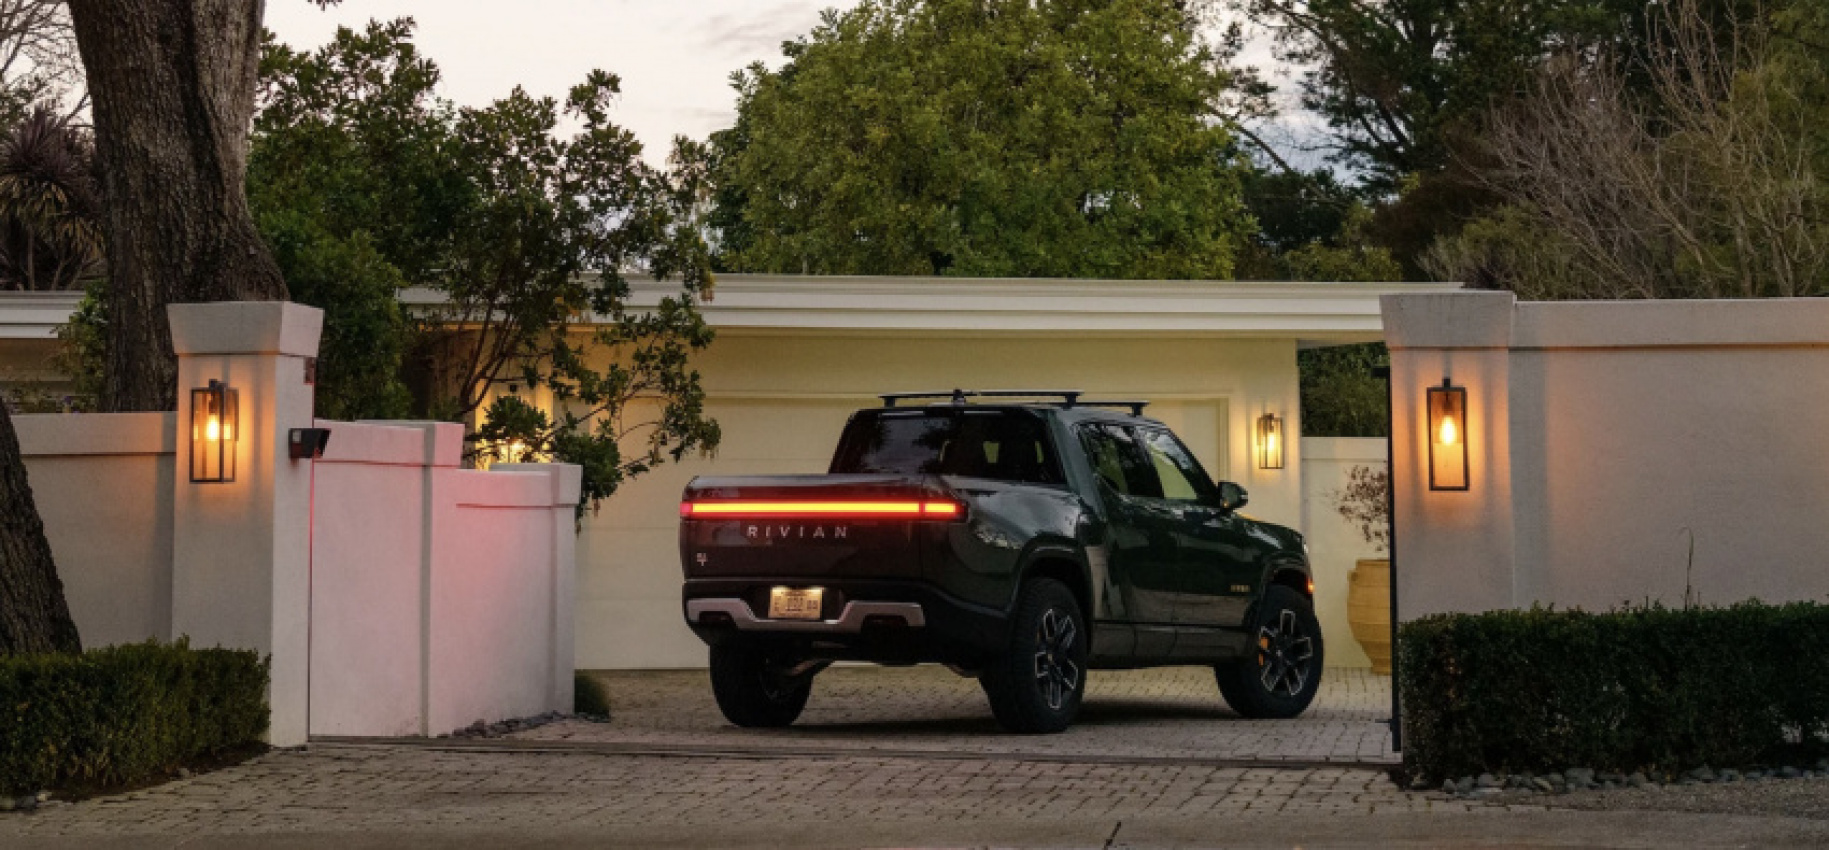 autos, cars, rivian, rivian buyers are canceling at alarming rates after price increases